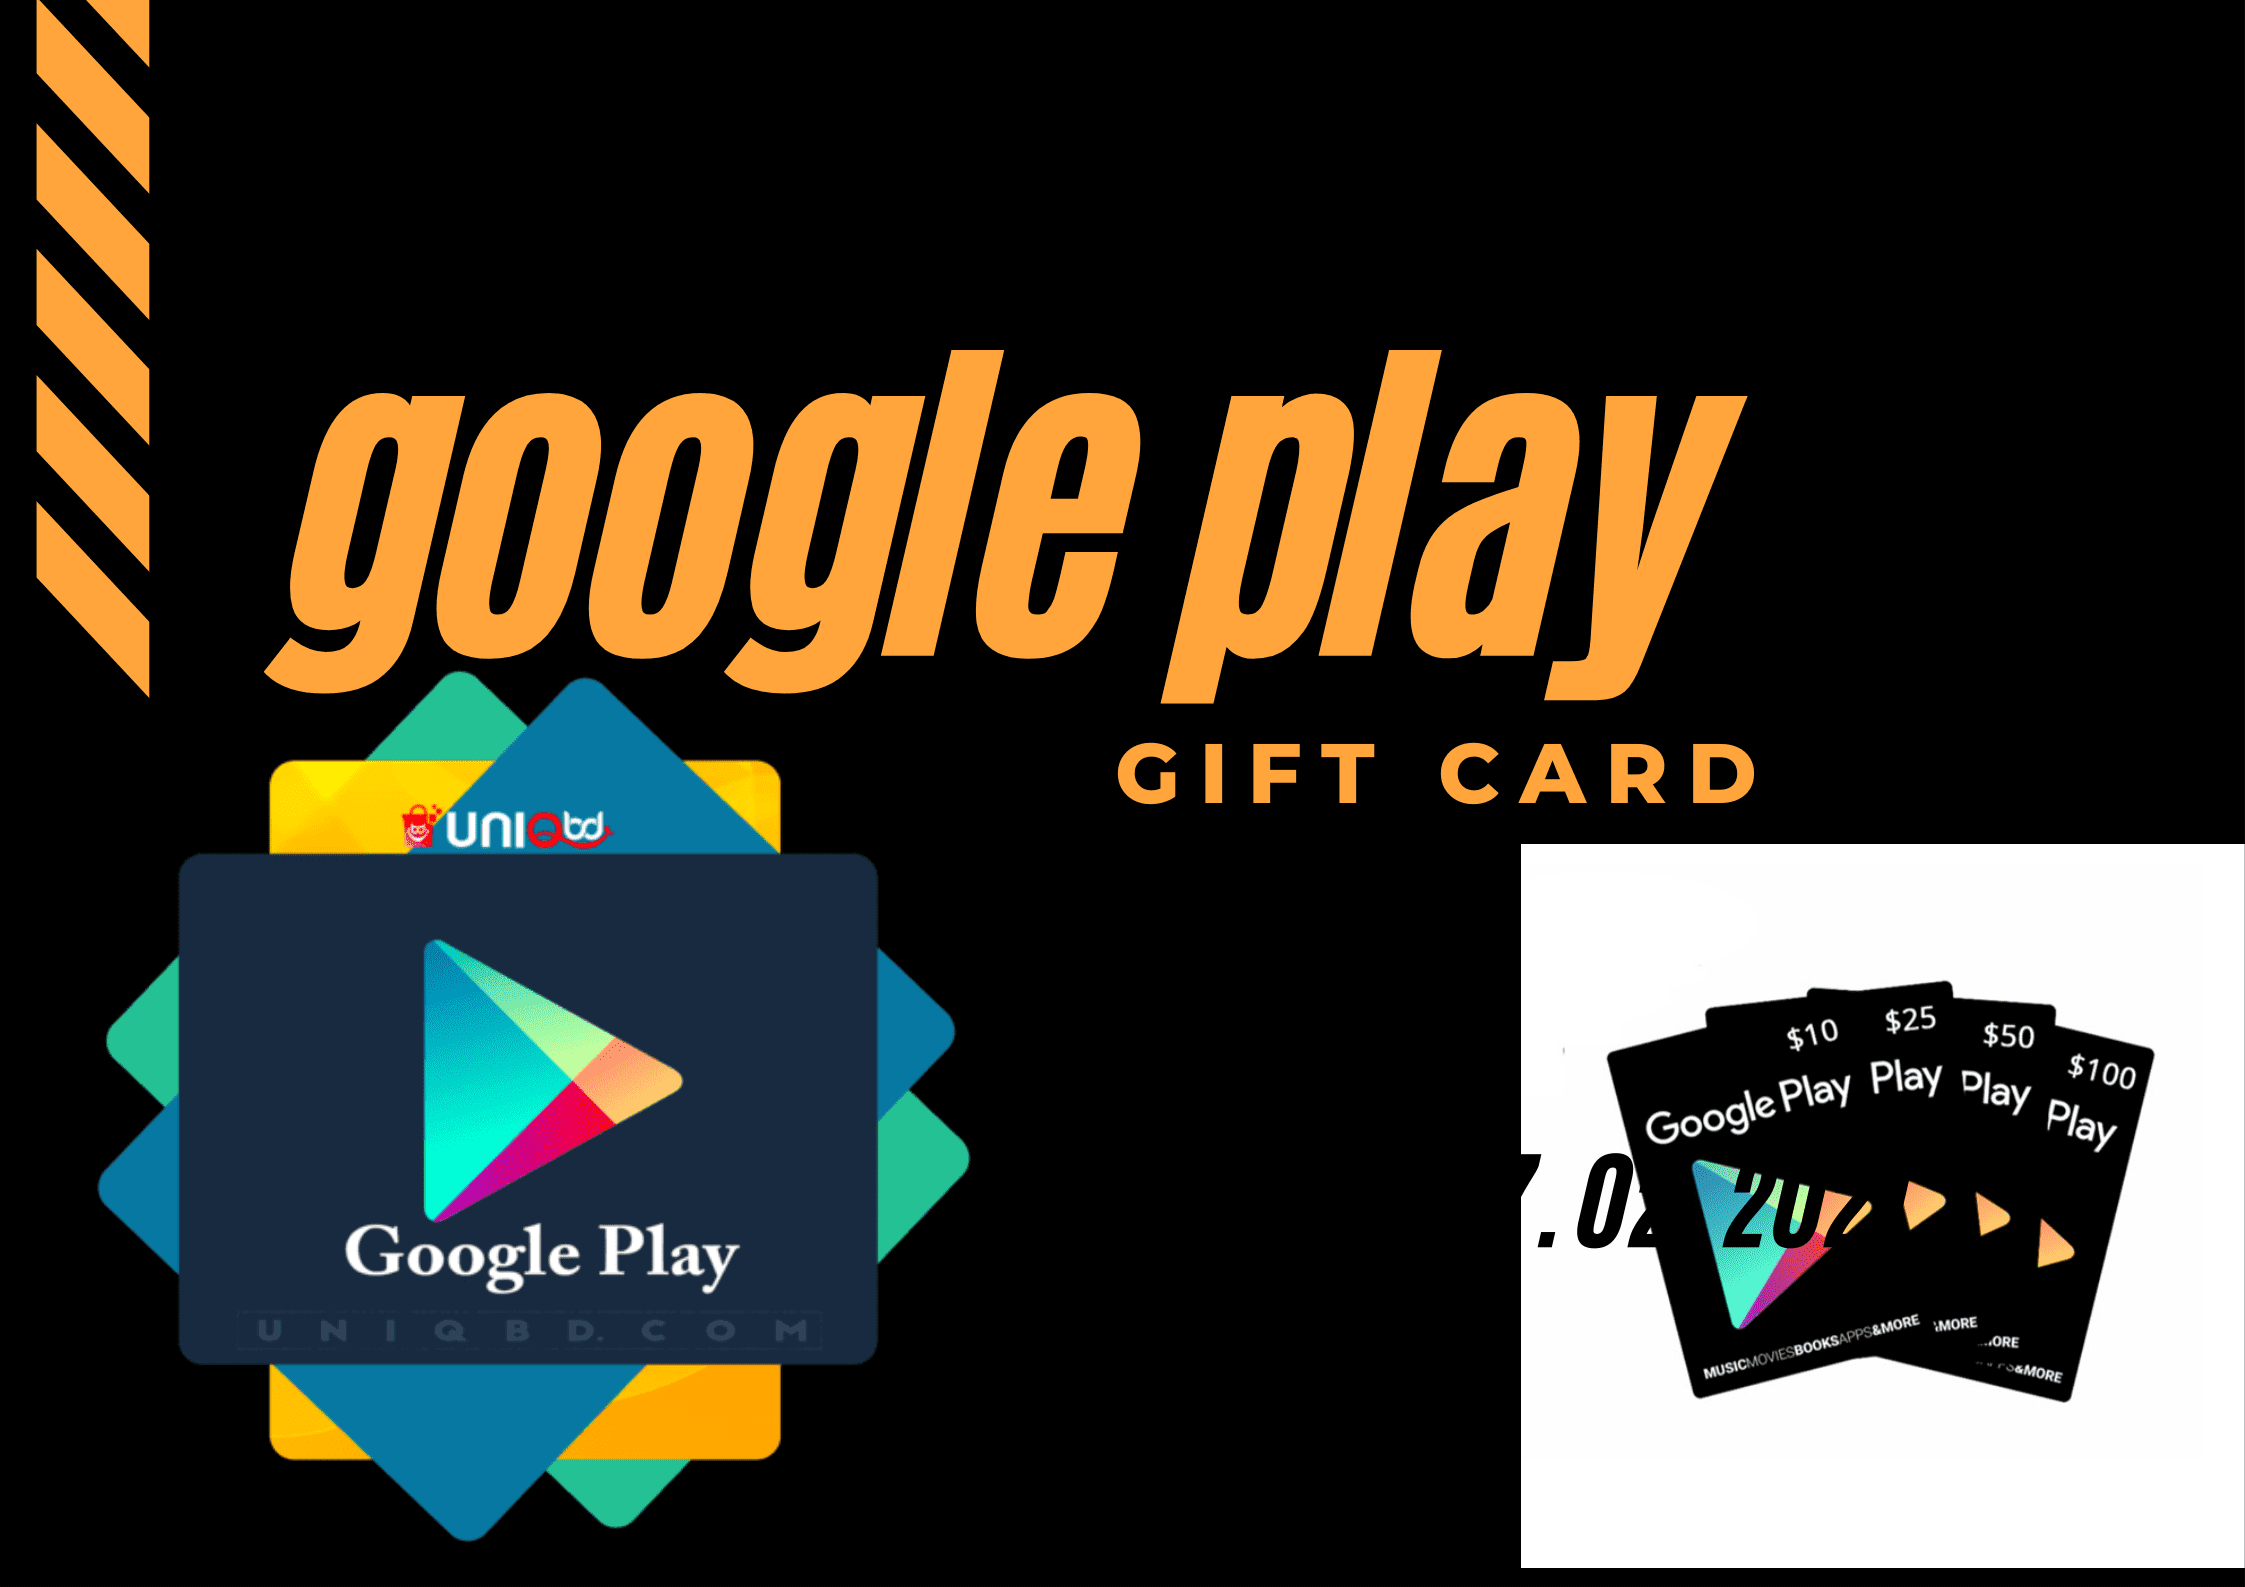 Google Play Gift Card Redeem Code Is Ready For You! It’s Unused!!